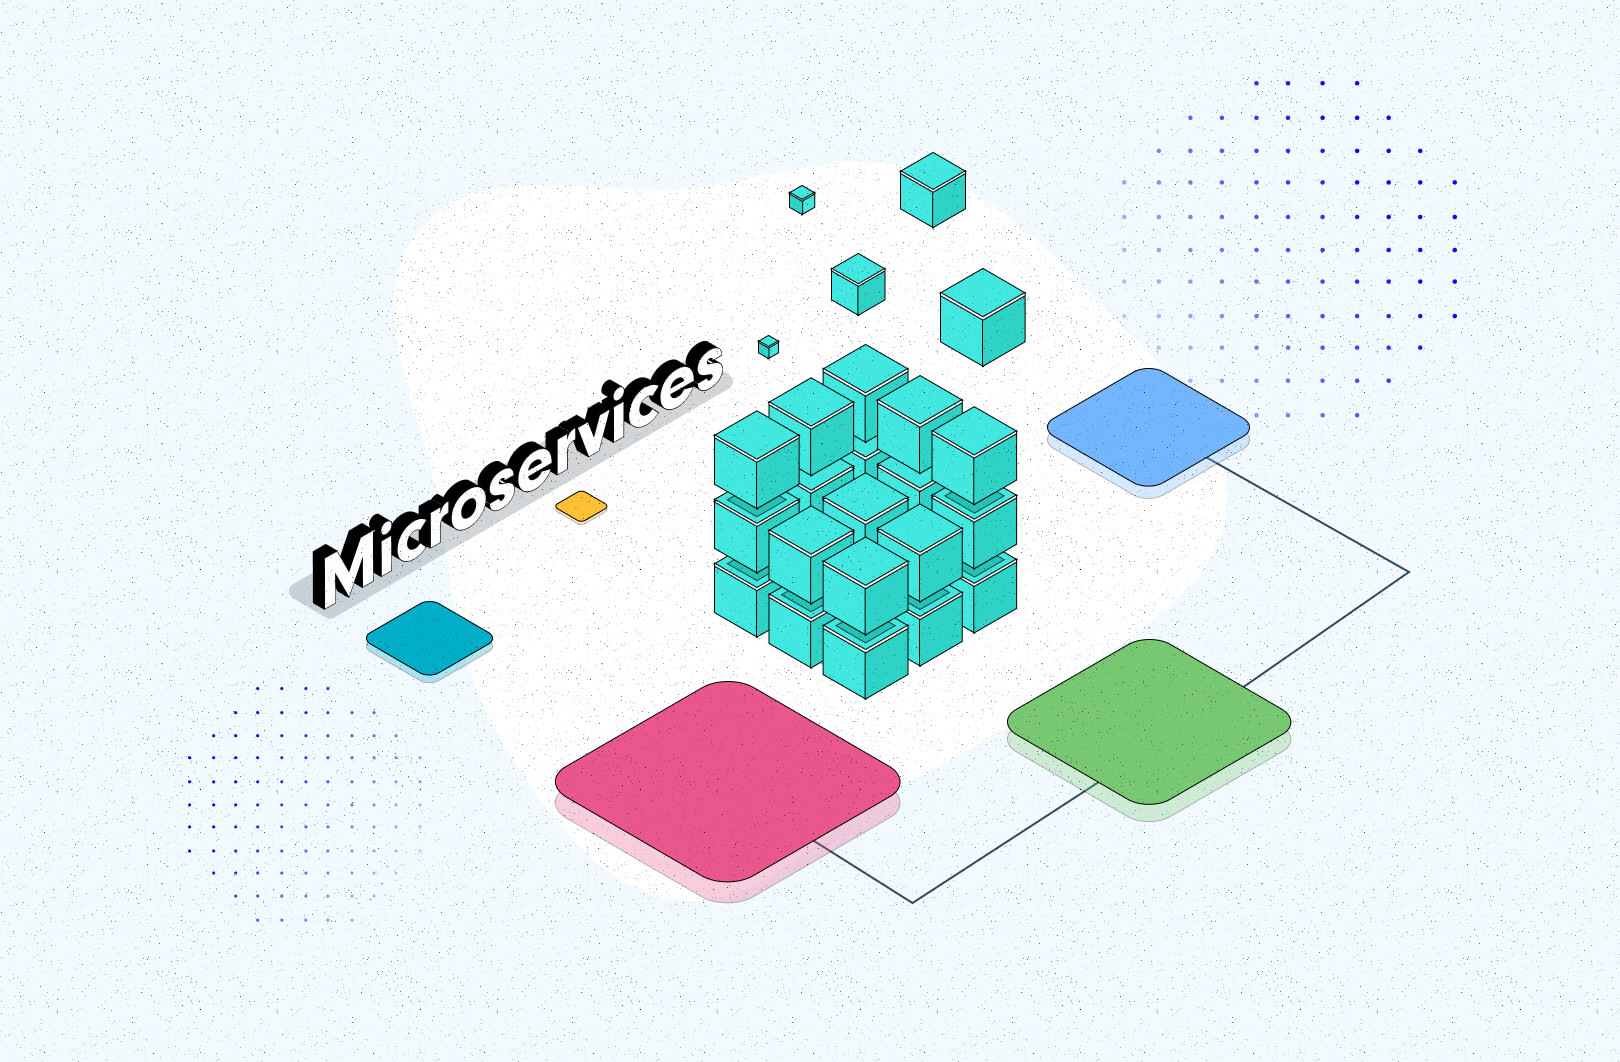 All about #2... microservices architecture – know this before adopting it in 2021